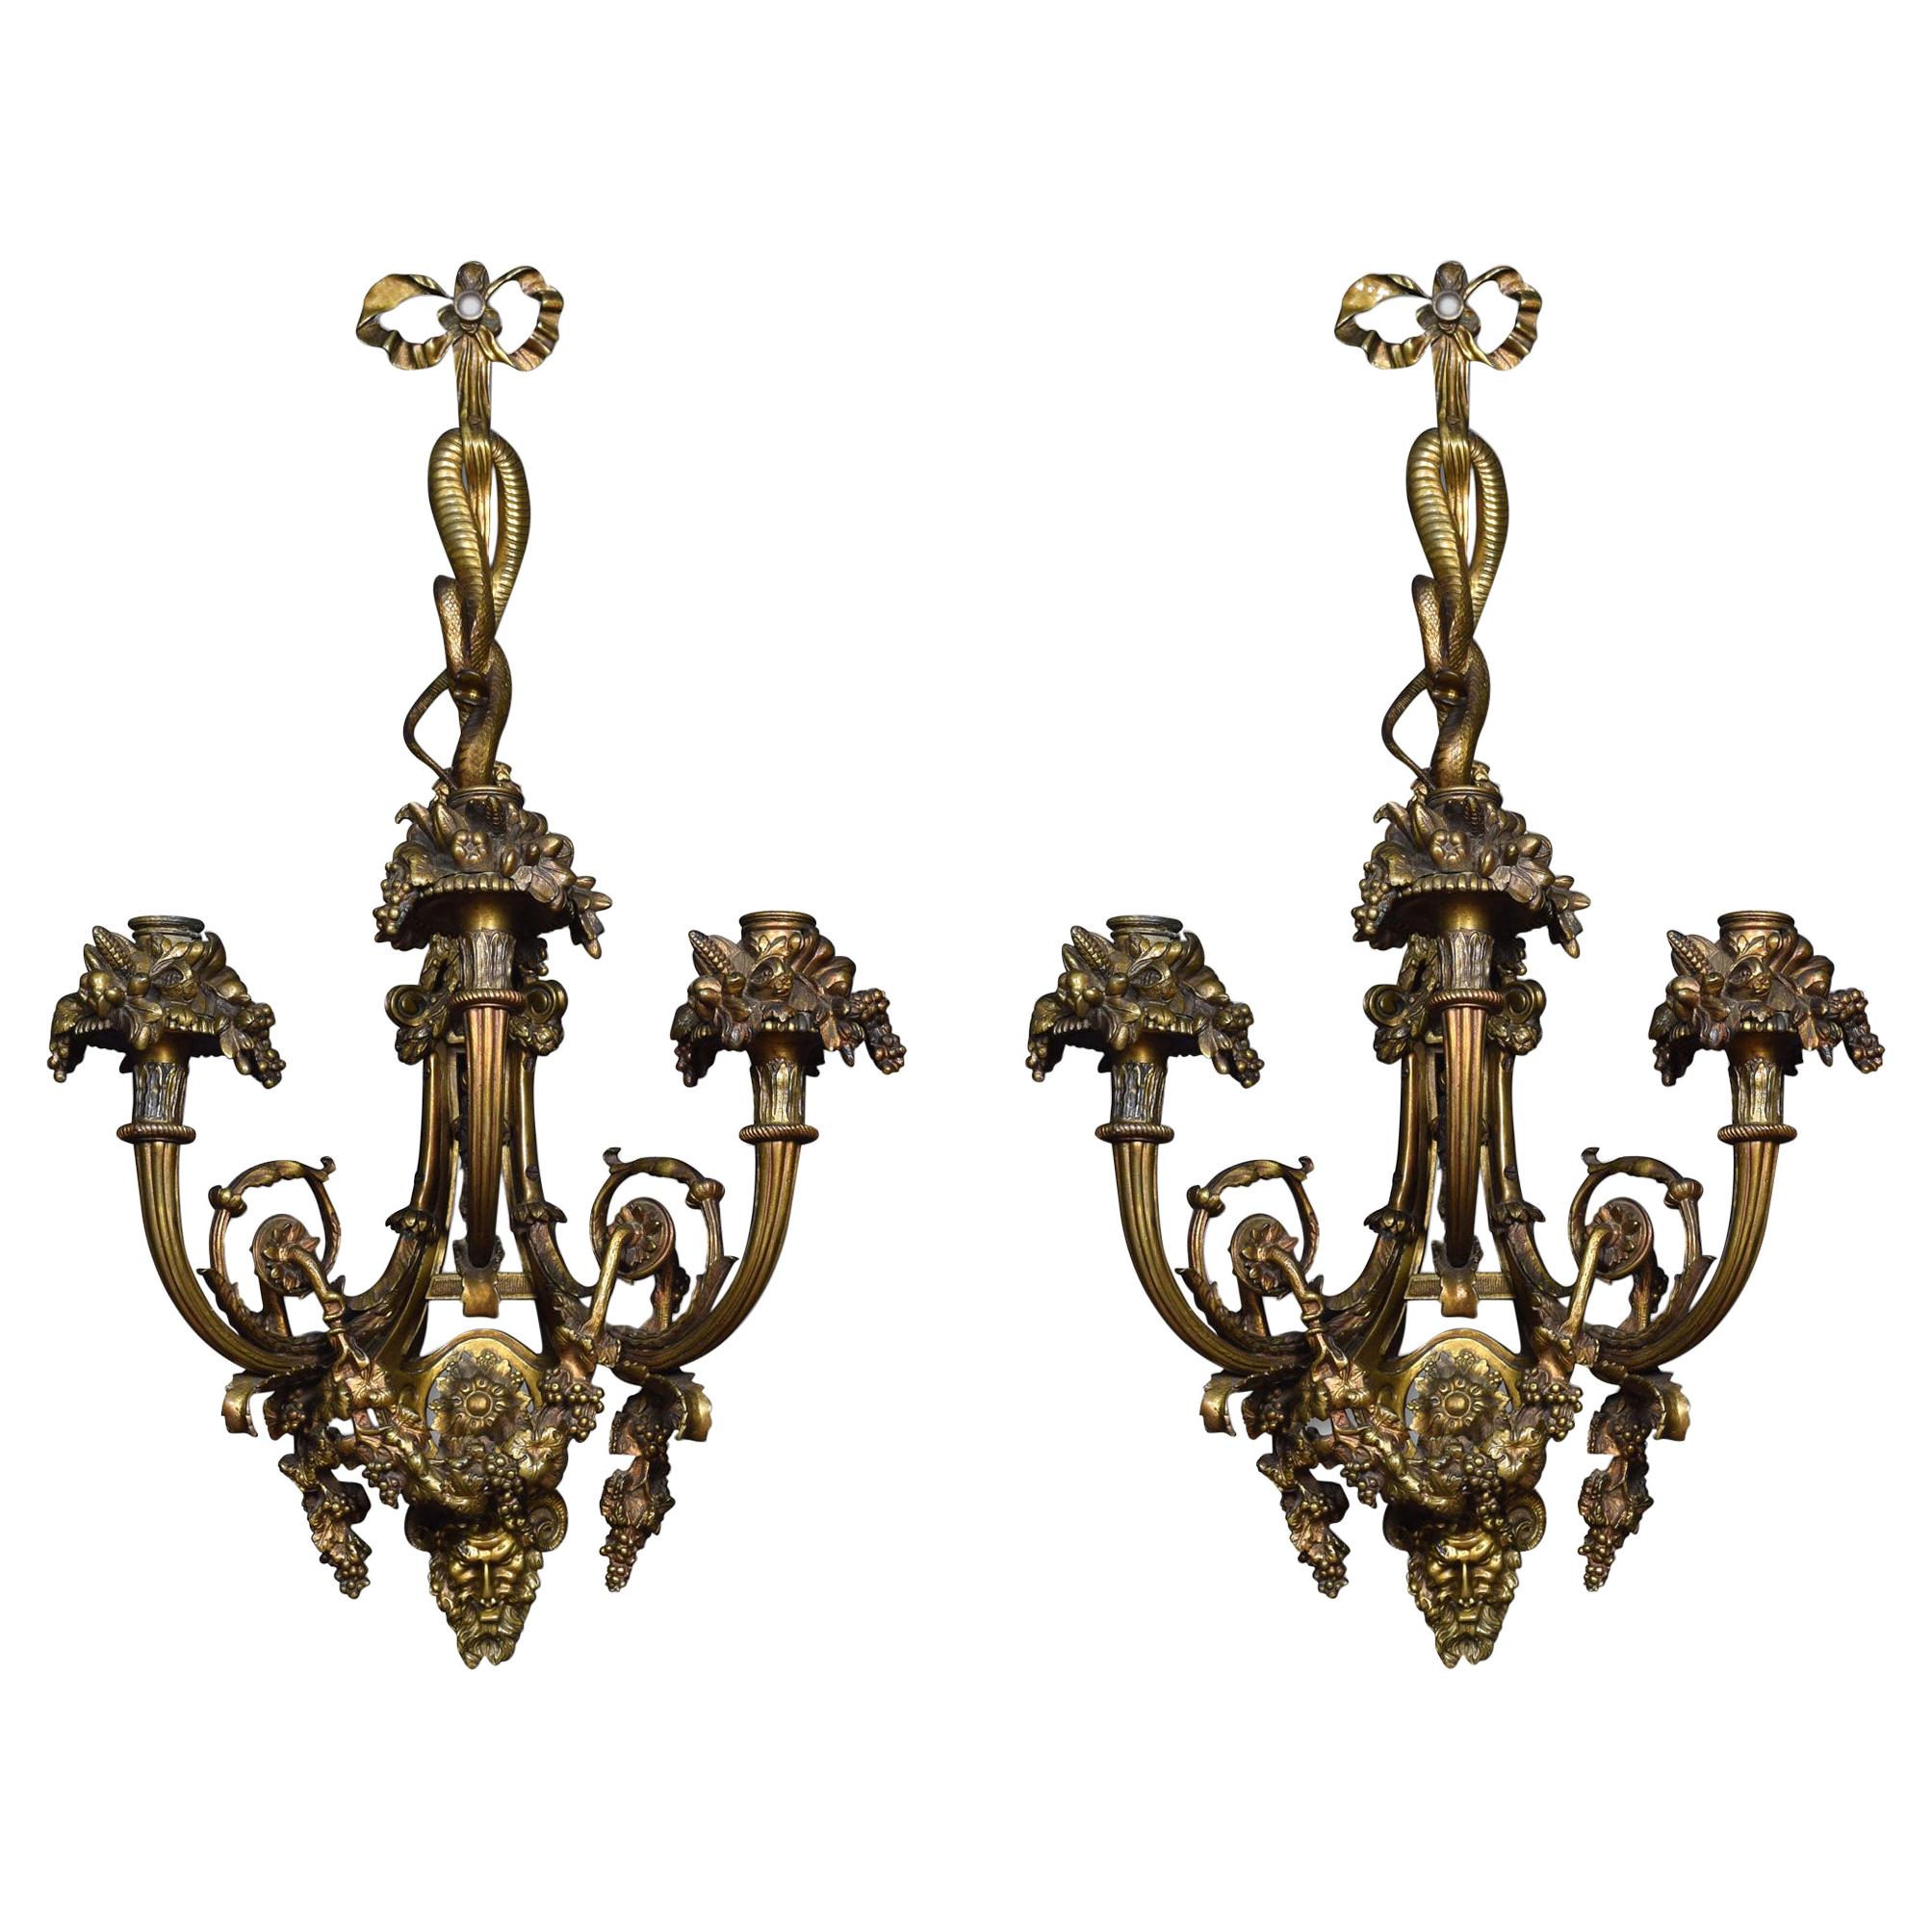 Pair of Important French Louis XIV Style Gilt Bronze Three Arm Wall Sconces